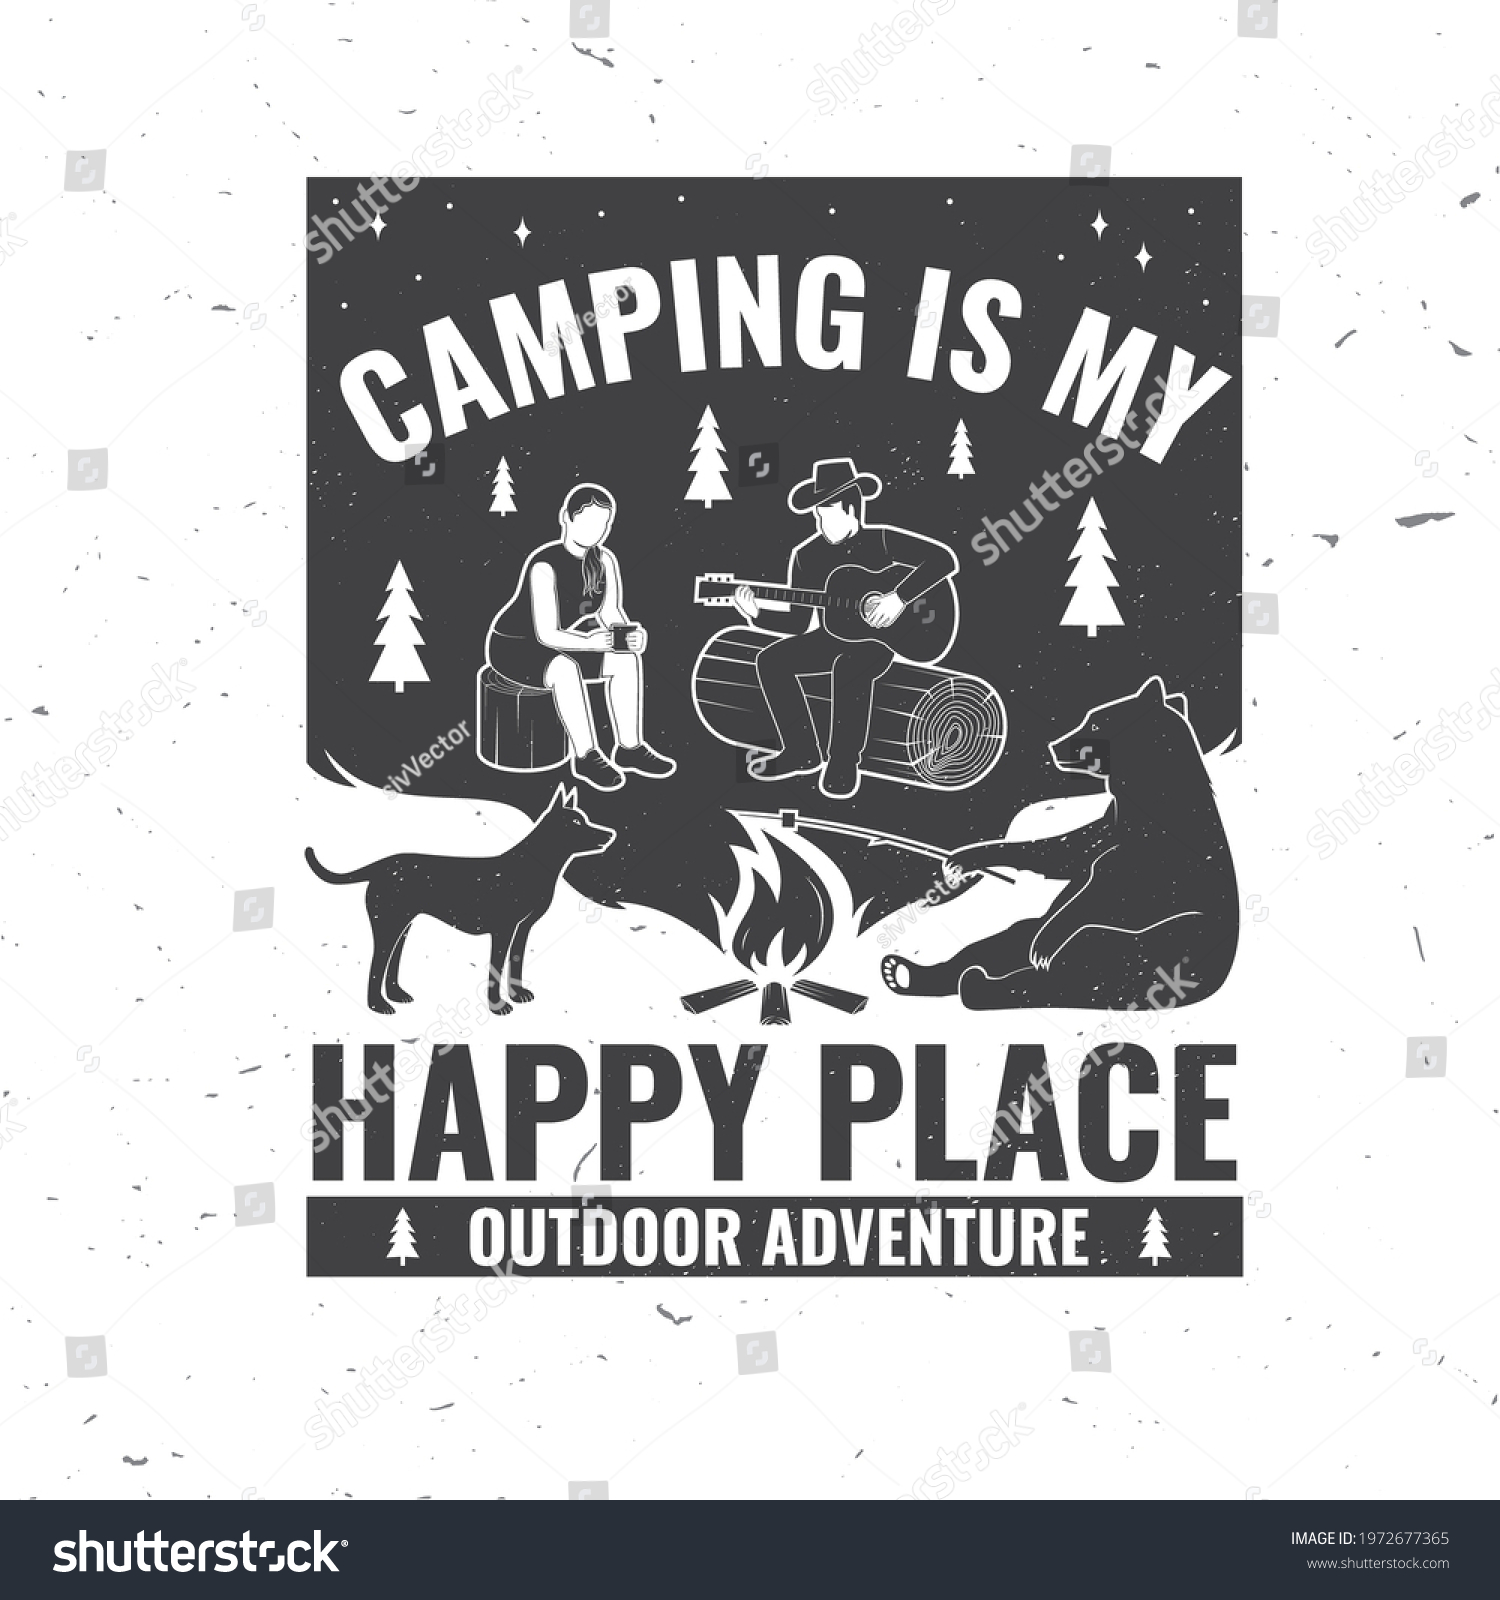 Camping My Happy Place Vector Illustration Stock Vector (Royalty Free ...